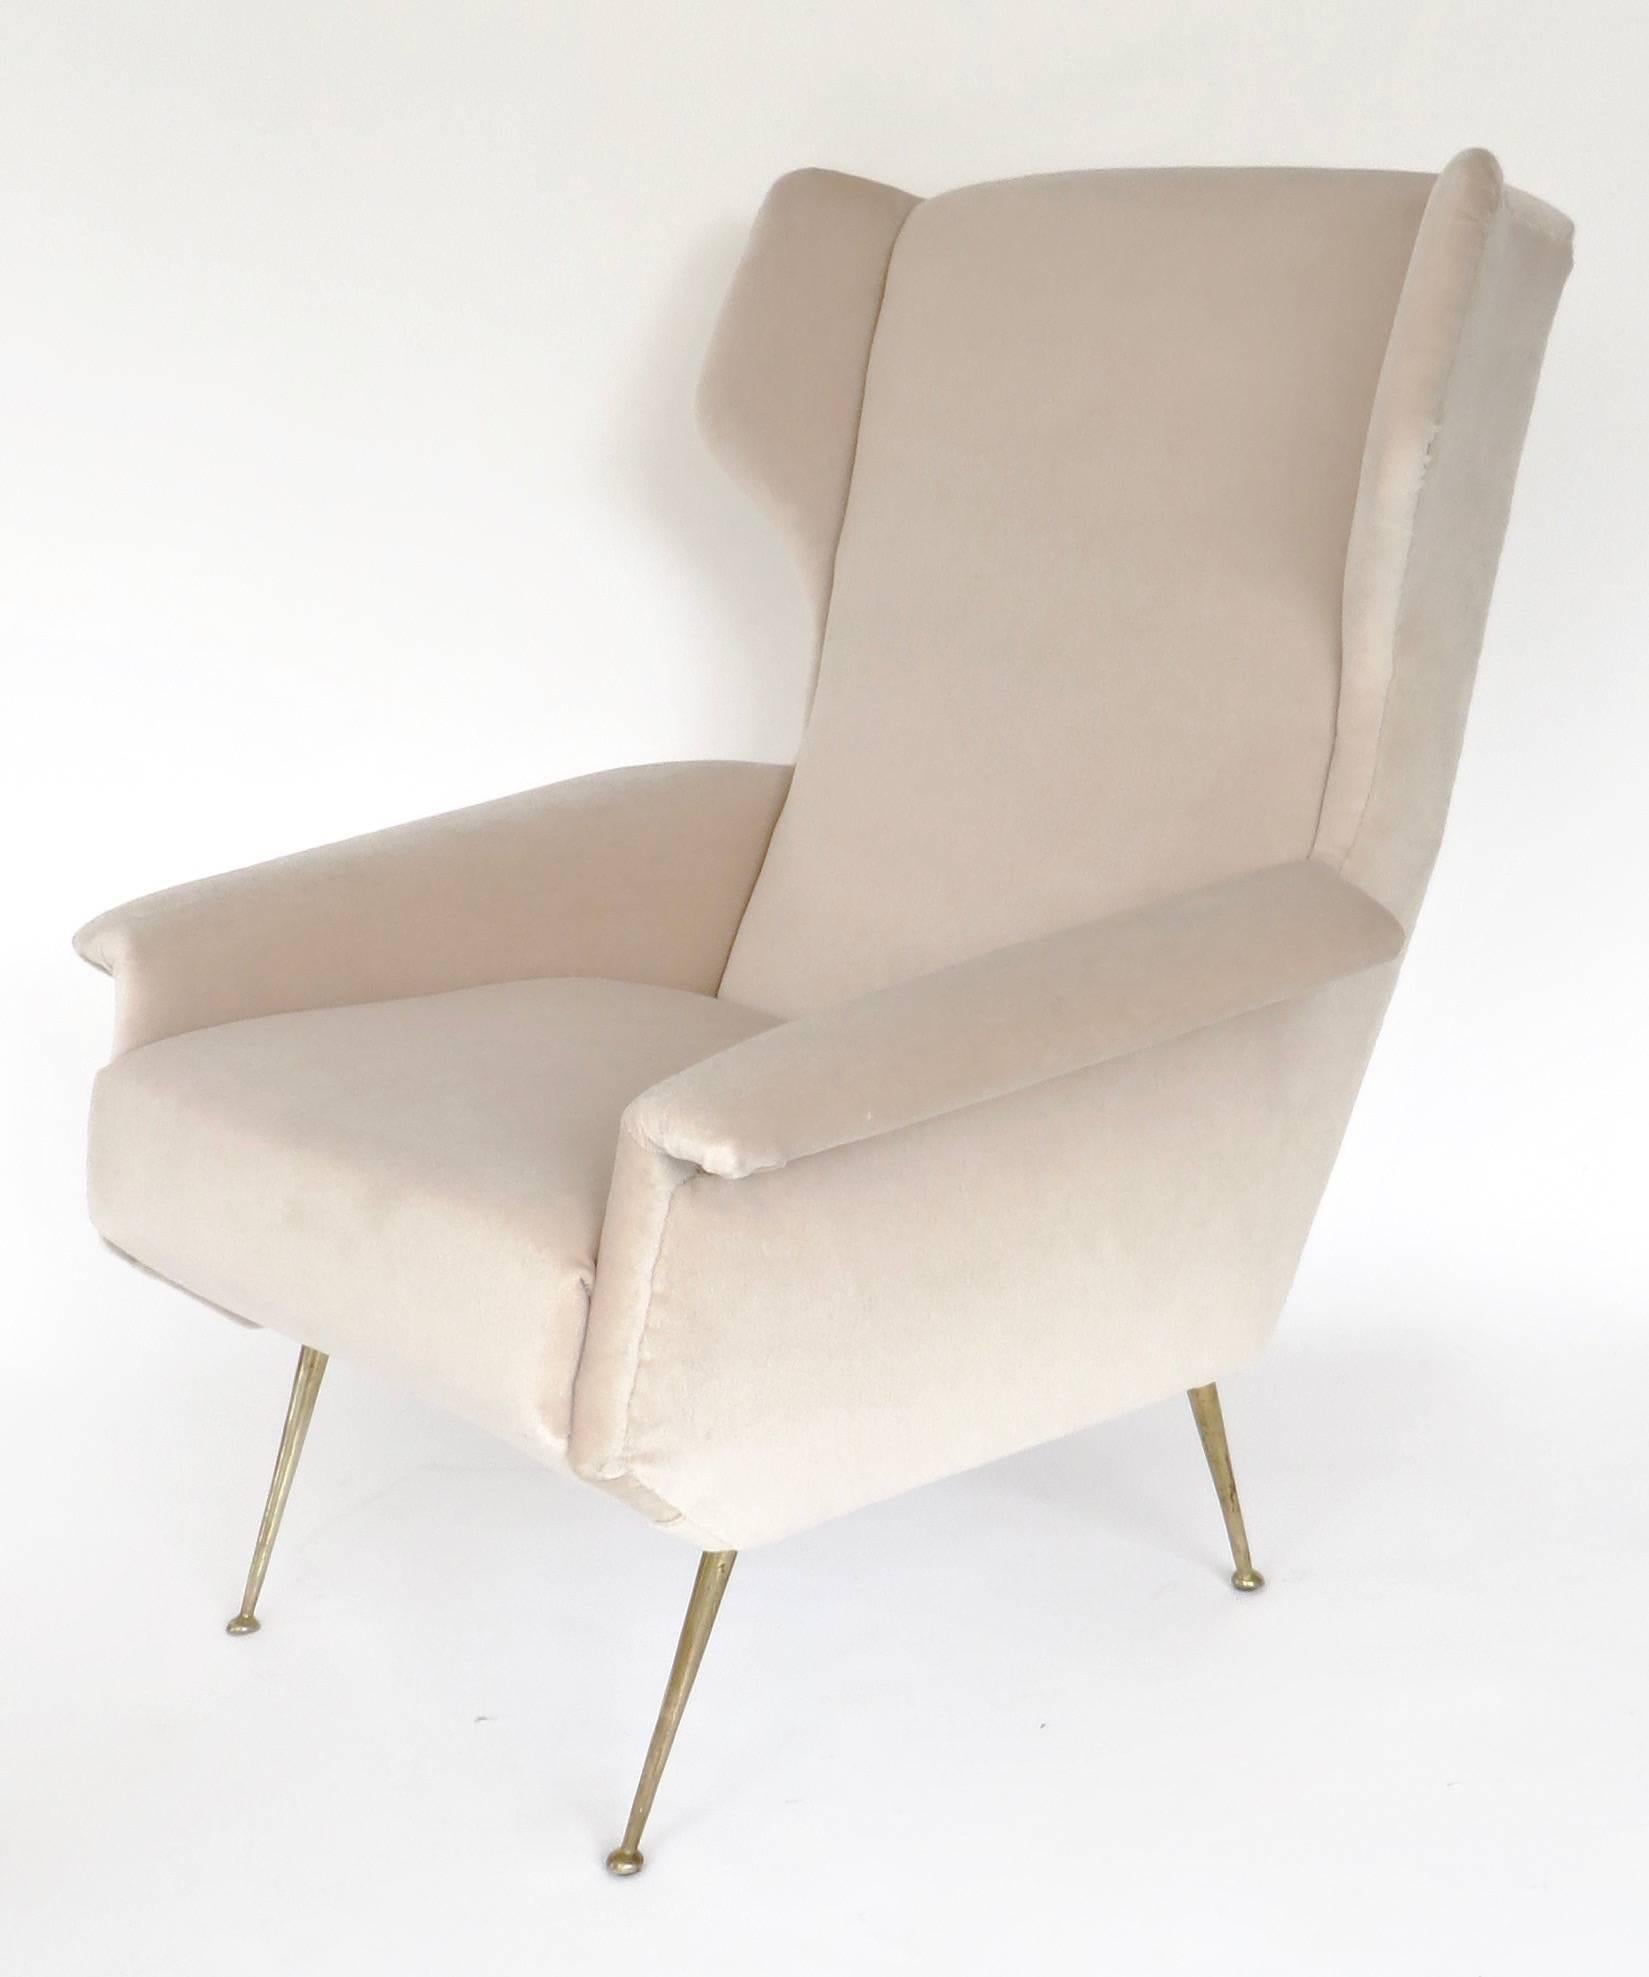 Mid-20th Century Italian Upholstered Wingback Lounge Chair with Brass Legs and Feet